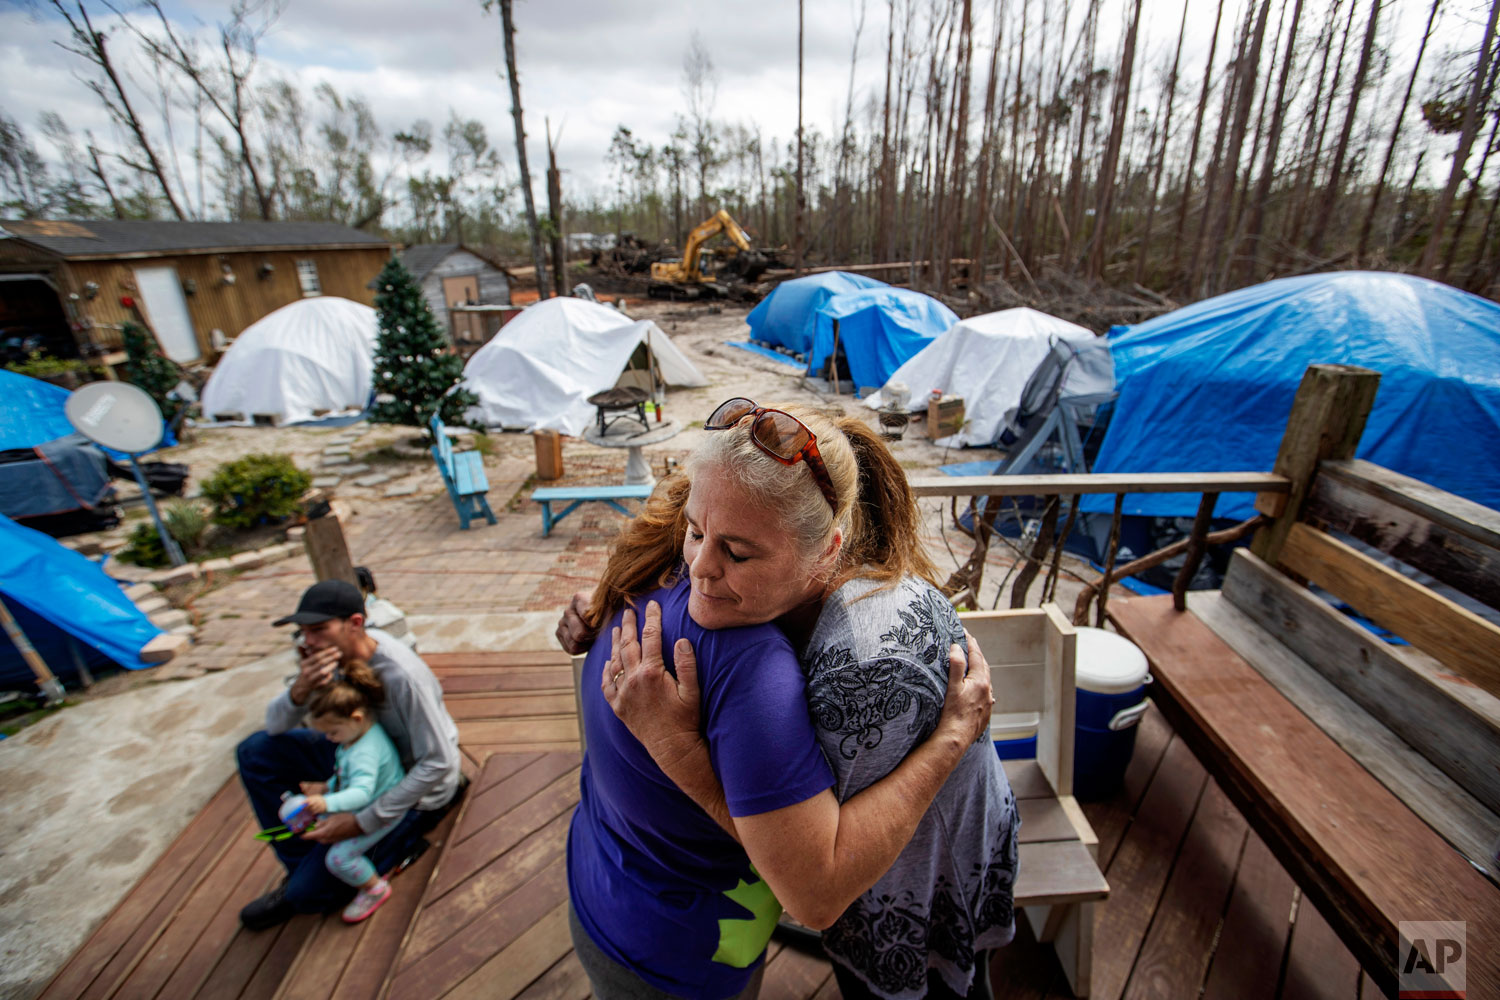  Diahnn "Shelly" Summers, right, embraces Lori Hogan, who is currently living in a tent in Summers' backyard months after Hurricane Michael hit in Youngstown, Fla, Wednesday, Jan. 23, 2019. "This is the first time I've felt comfortable since the hurr